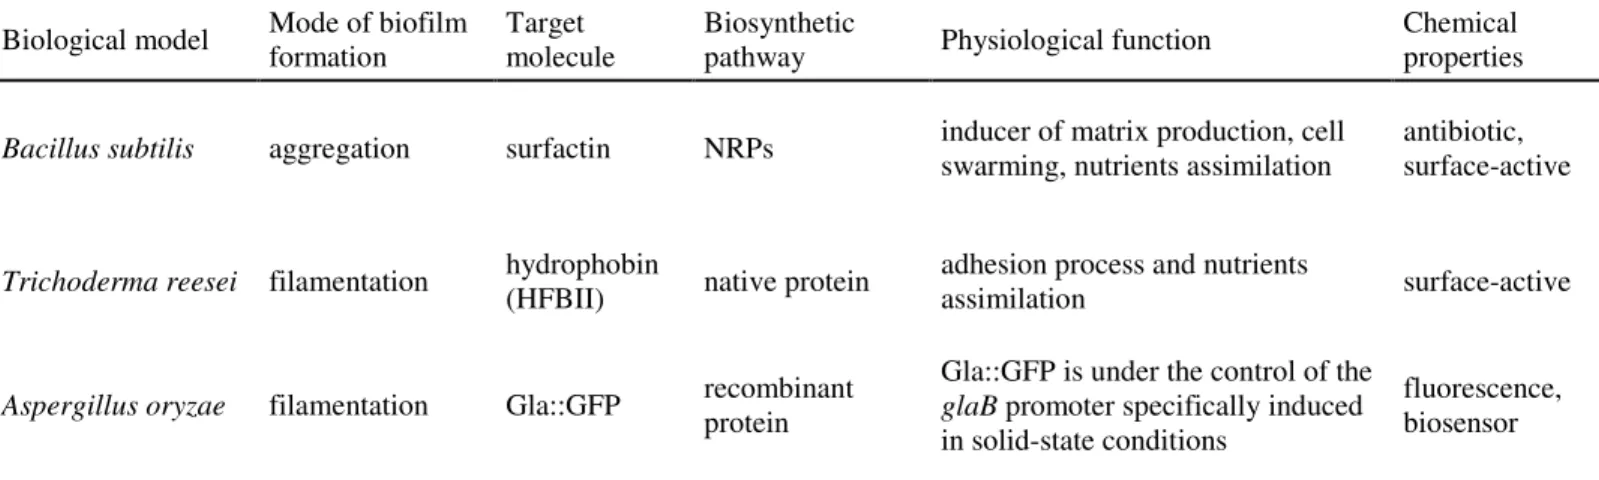 Table 1 : Characteristic features of biological models and target molecules selected for the design of the single-species BfR